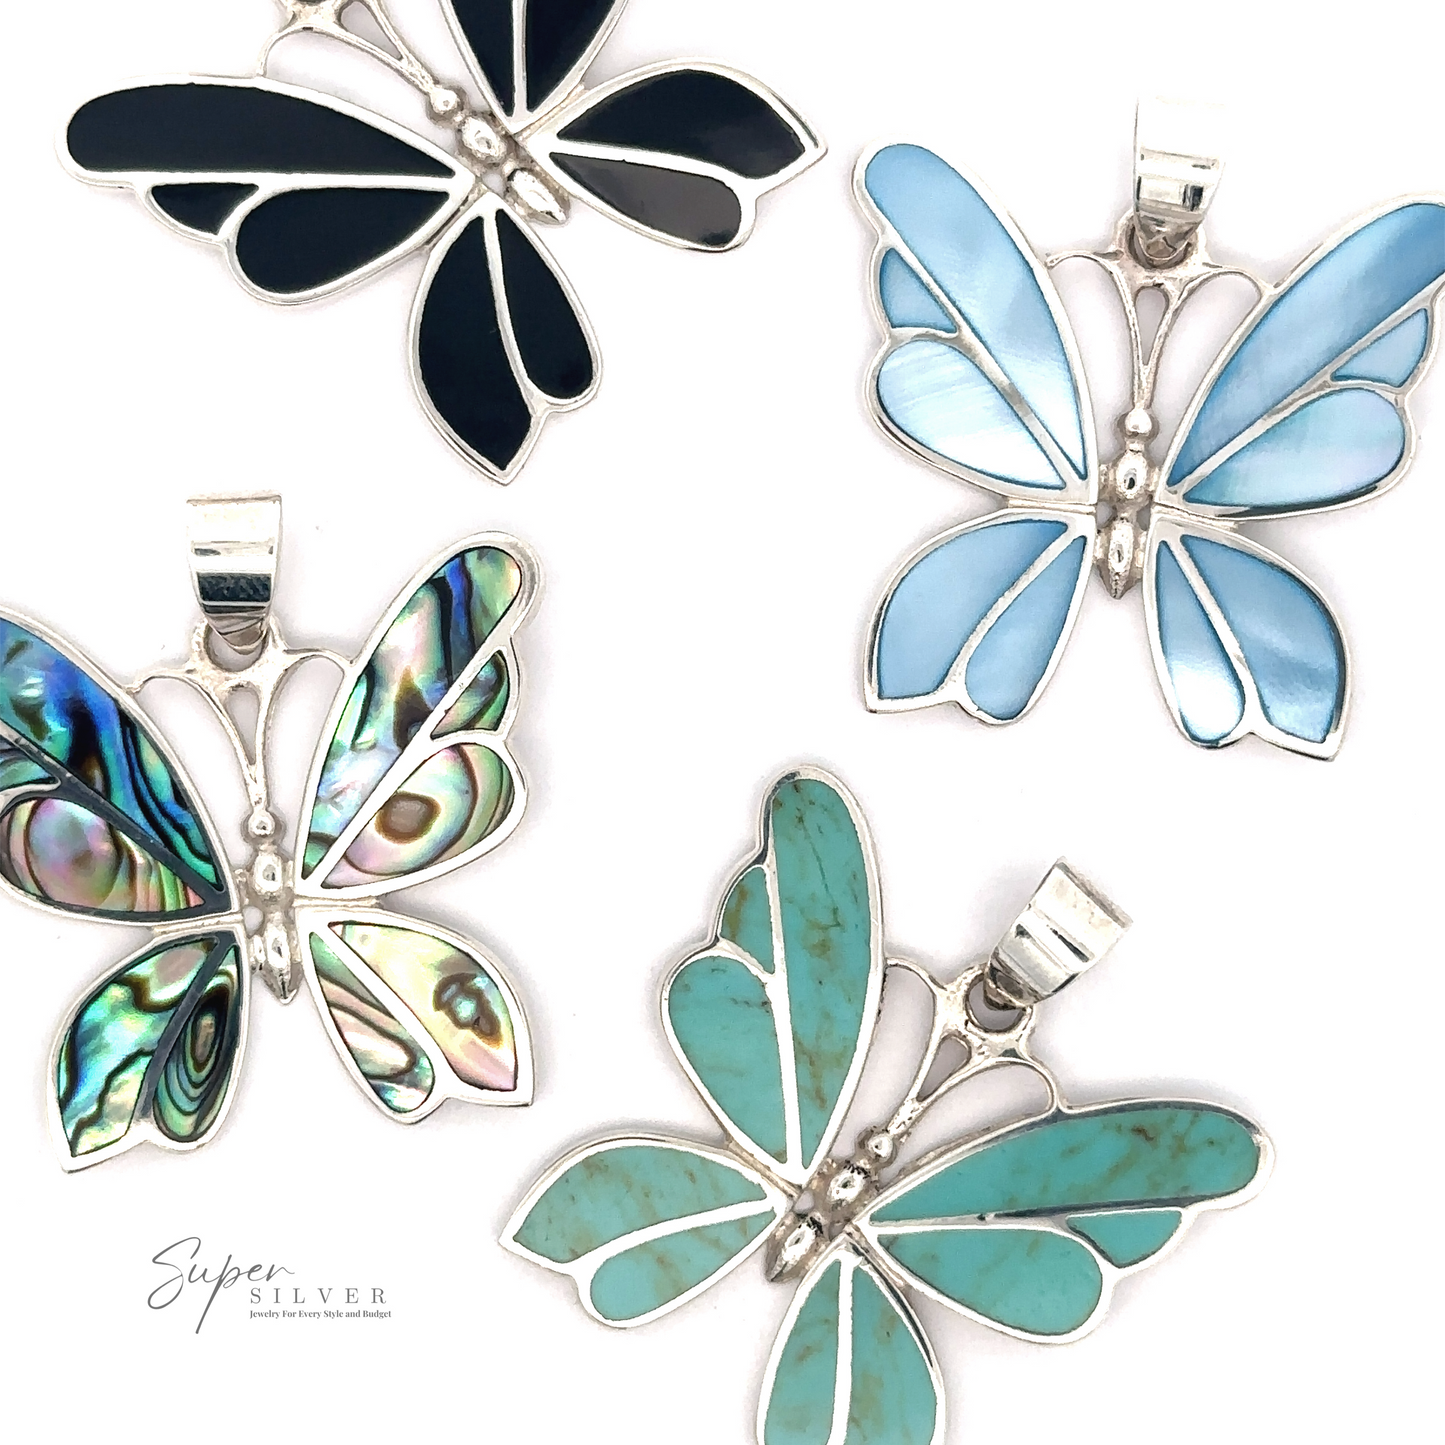 
                  
                    Four Medium Inlay Butterfly Pendants in silver frames, decorated with various colorful inlays including blue, green, and iridescent patterns, arranged on a white background. The "Super Silver" logo sits elegantly in the corner.
                  
                